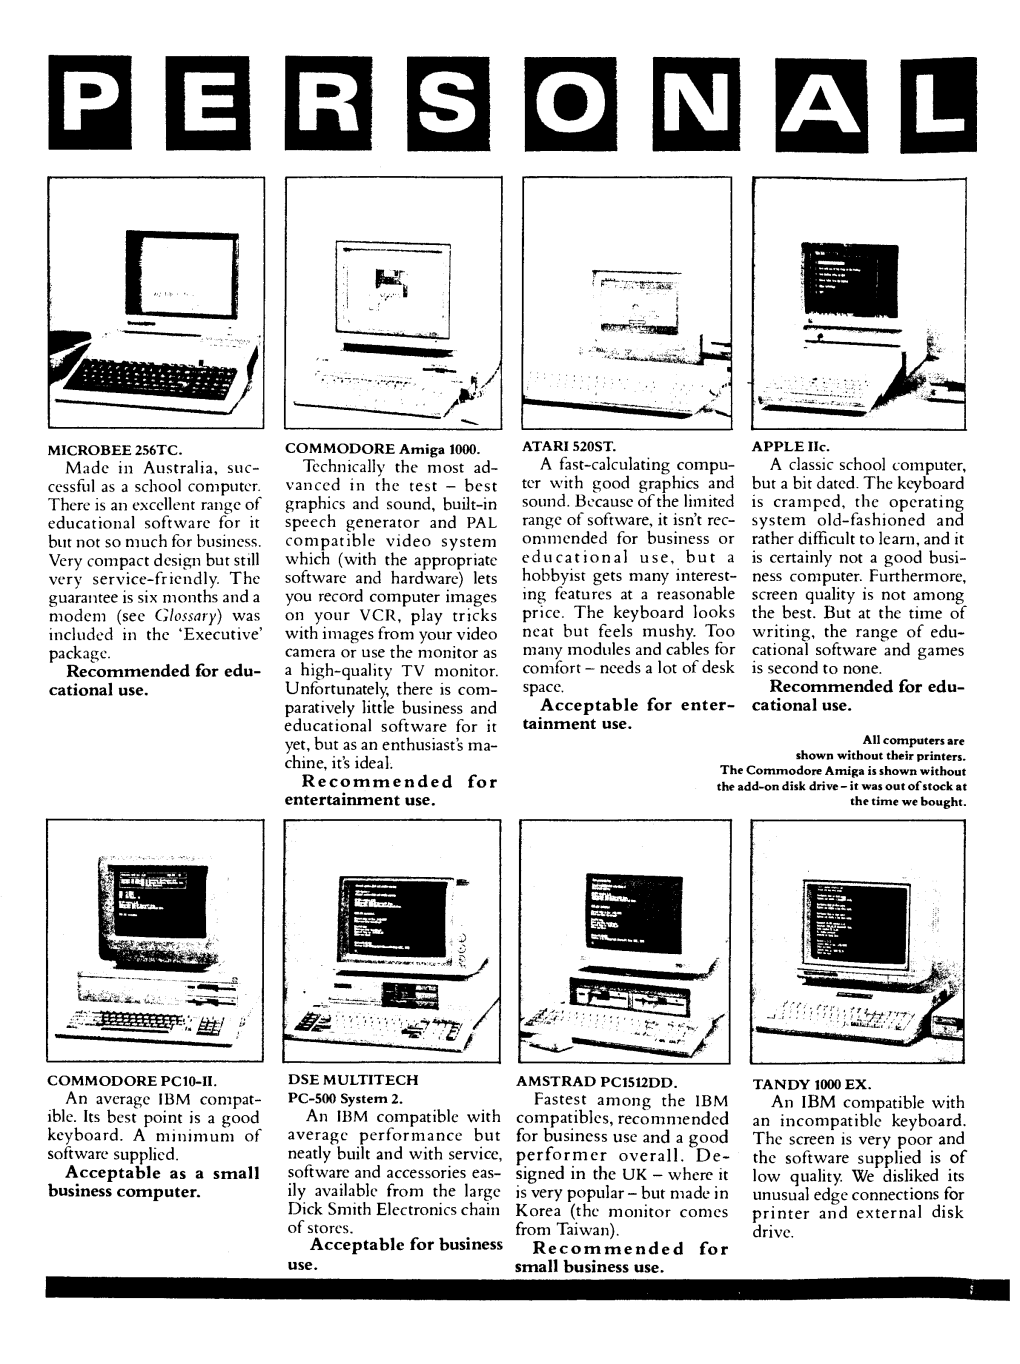 Feature Comparison of Computers by Choice Magazine